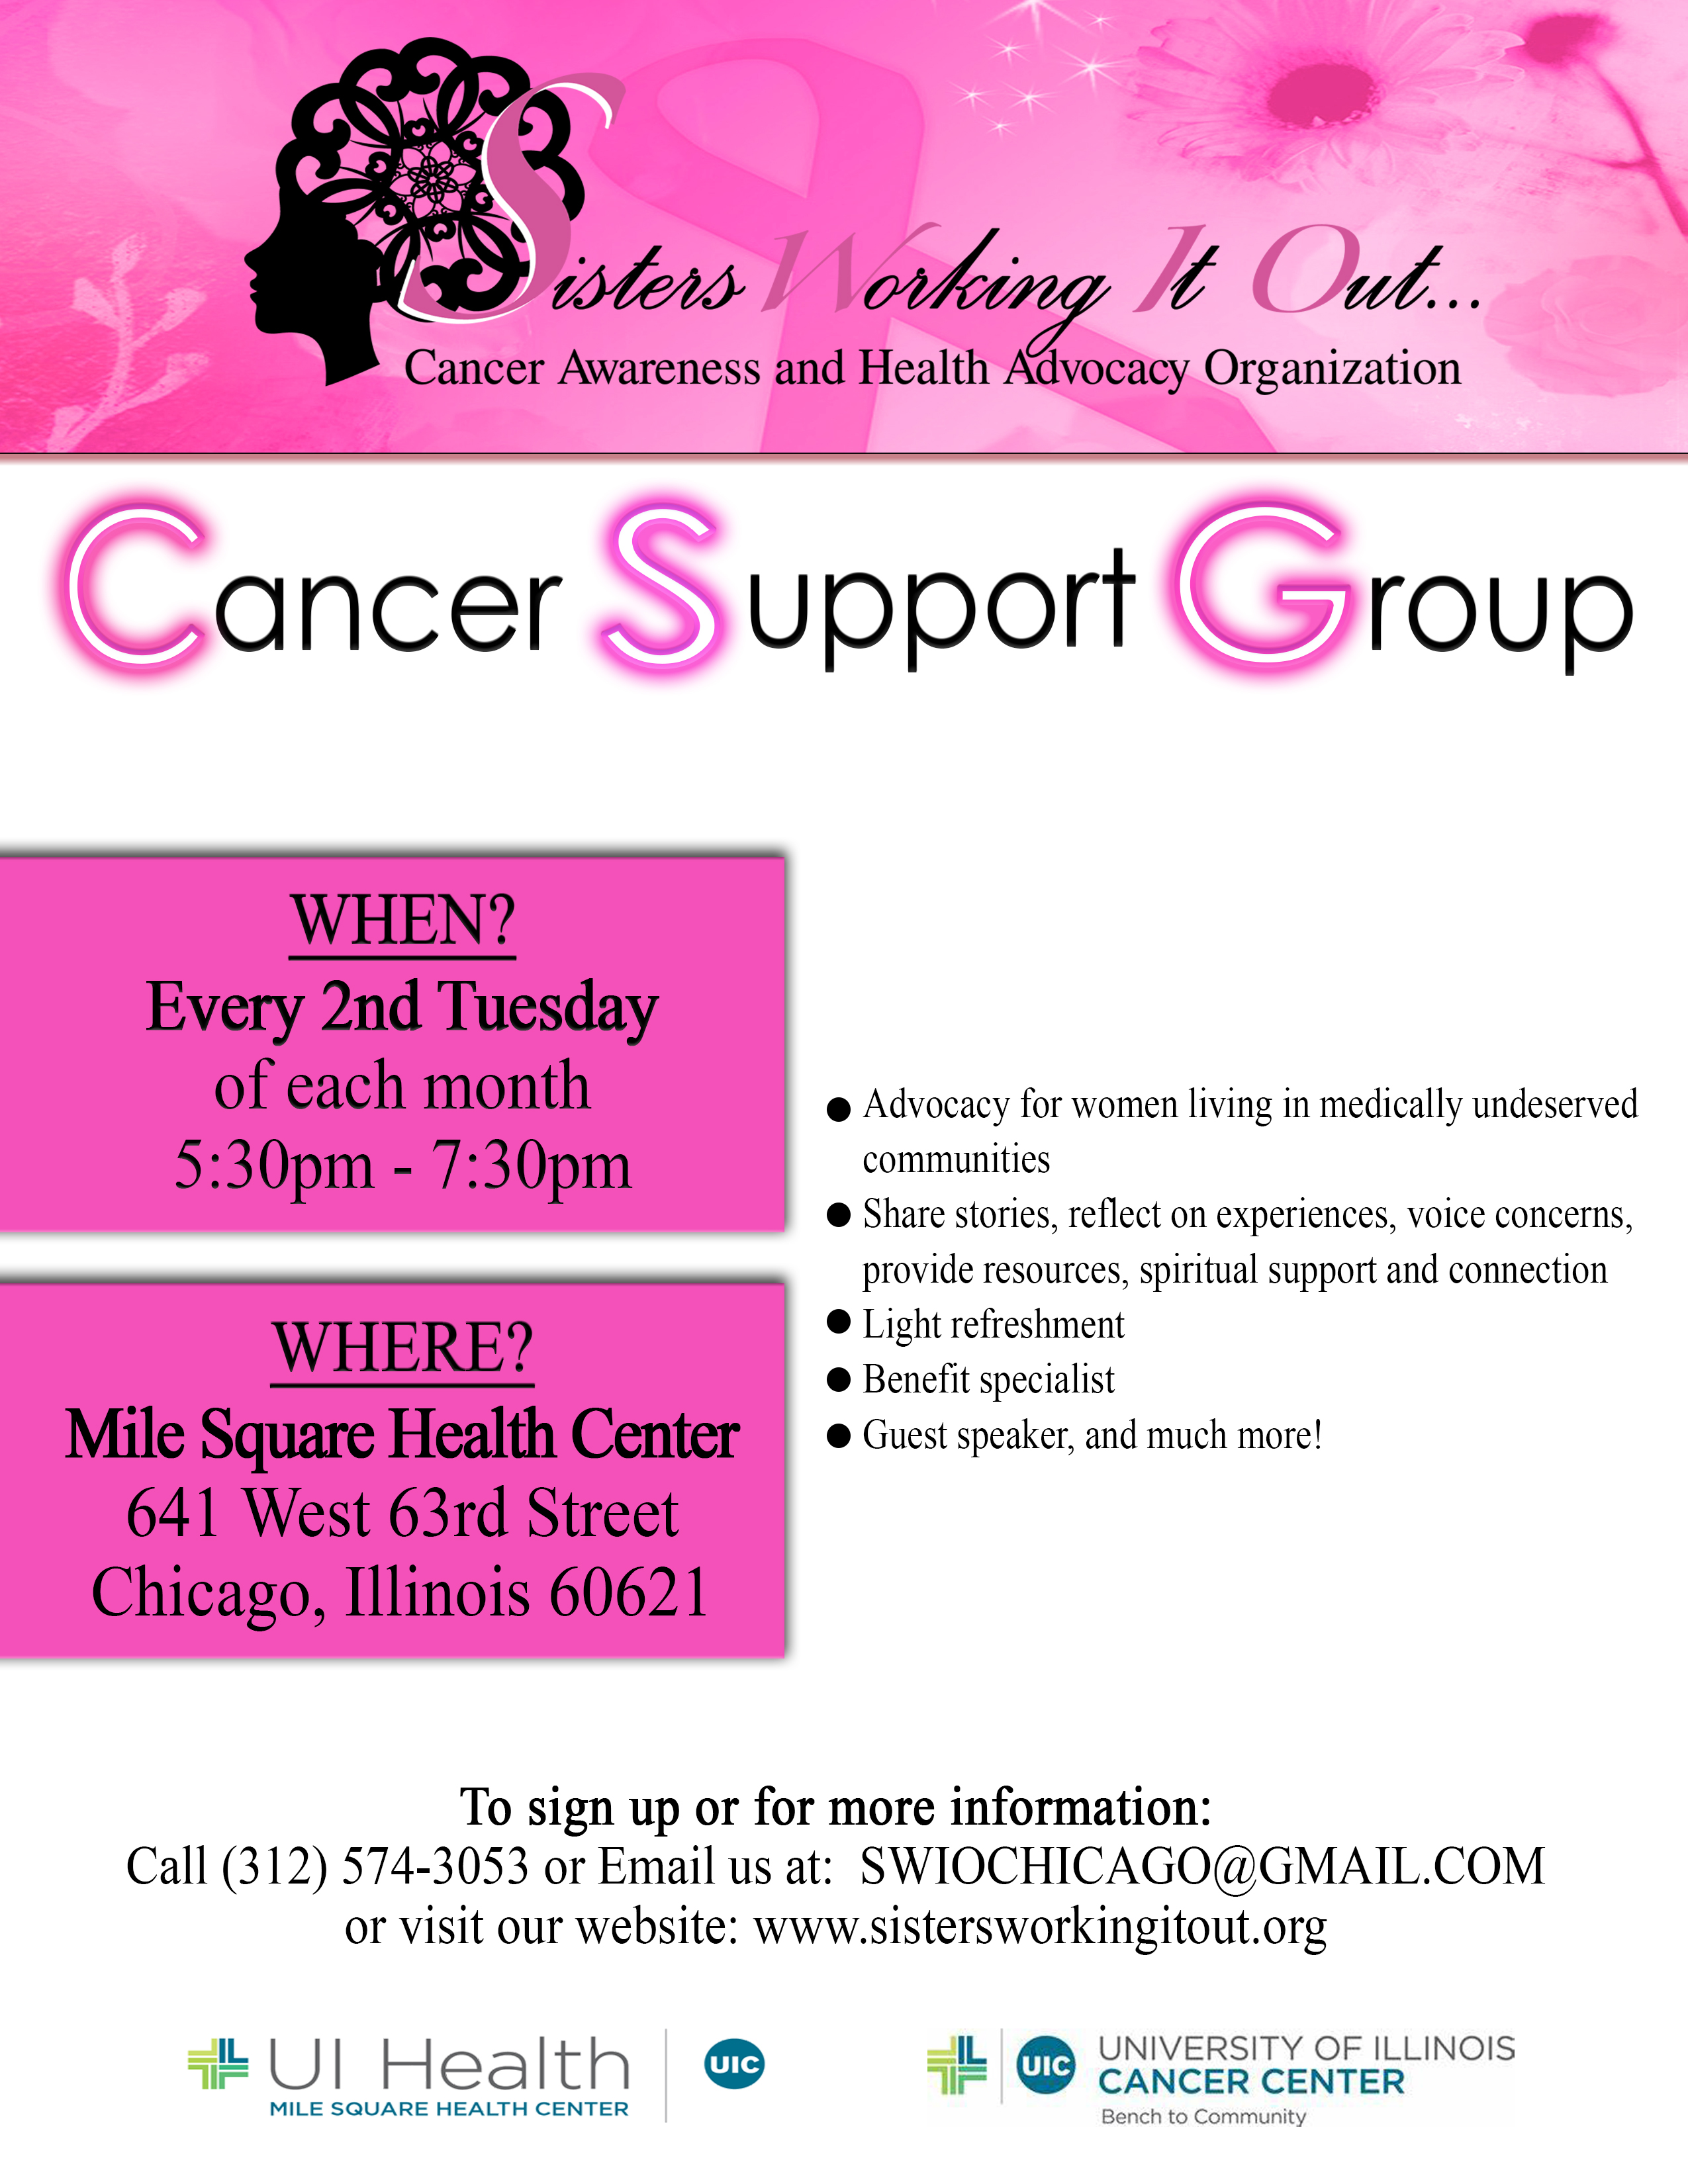 SWIO Cancer Support group flyer 2019 1 2 1